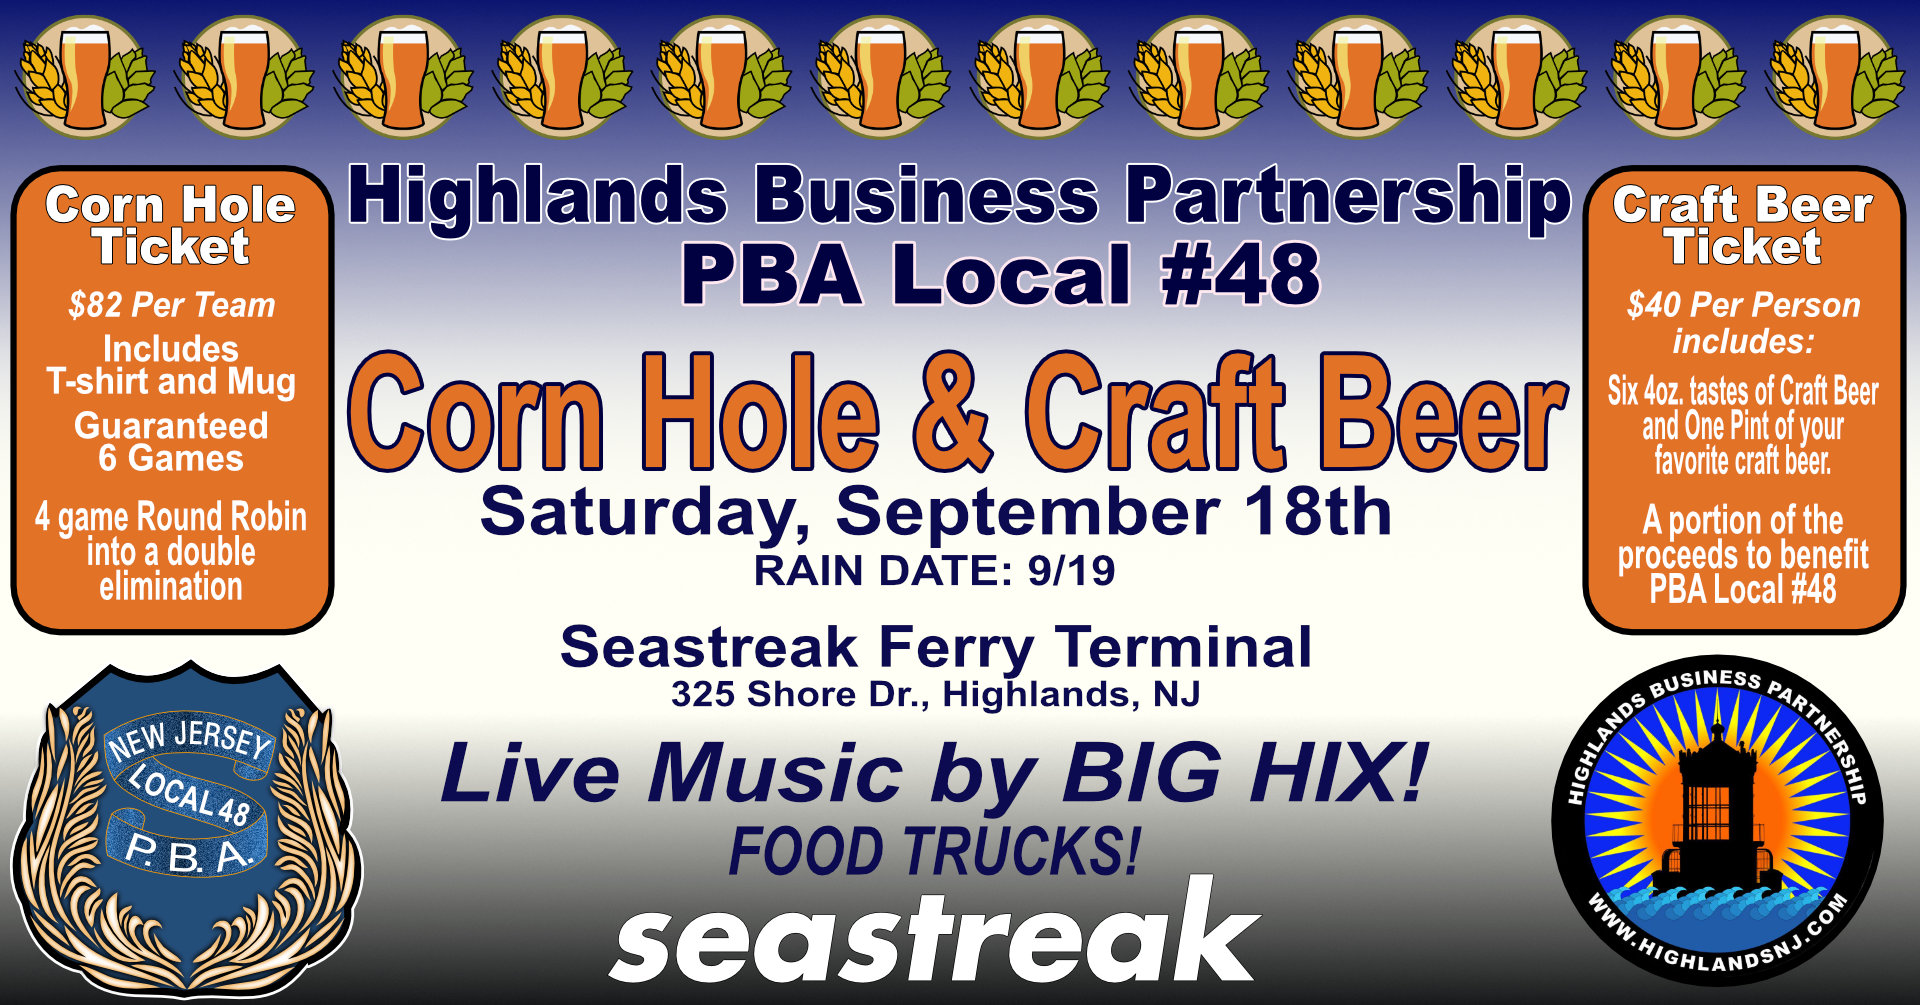 The Highlands Business Partnership and Seastreak are hosting the Annual Corn Hole and Crafts Brews in September, at Seastreak Terminal, 325 Shore Dr. Highlands, NJ